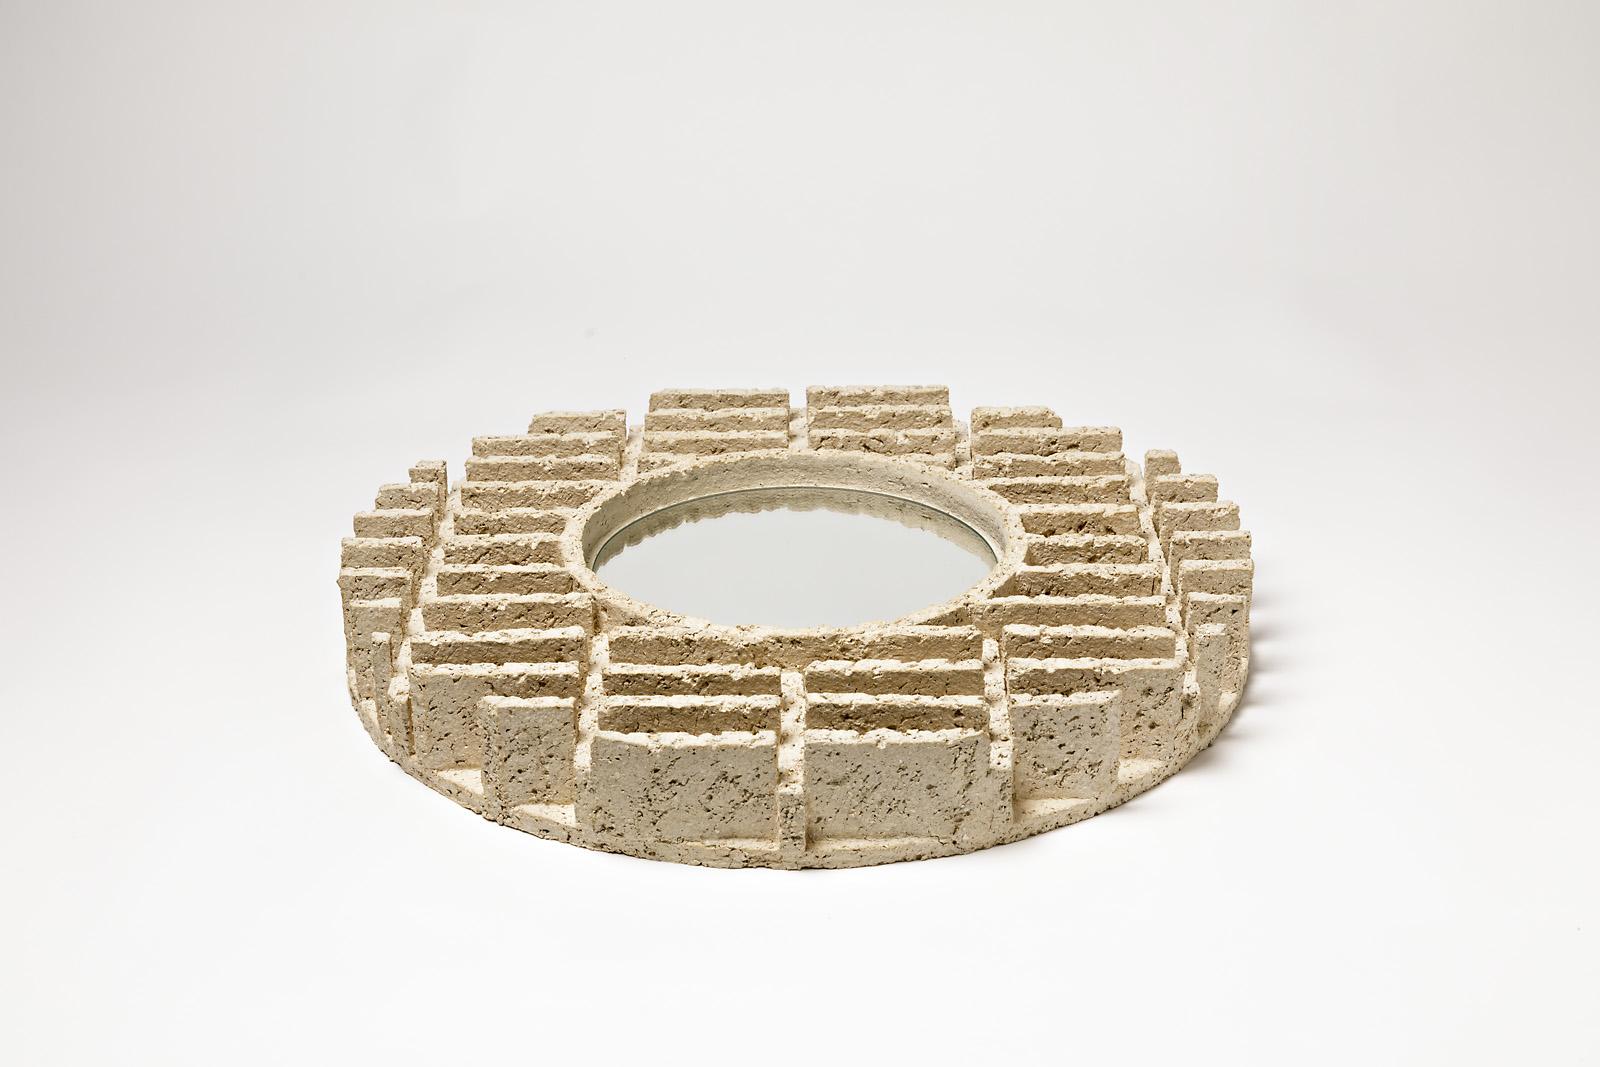 Contemporary Ceramic Mirror by Denis Castaing, 2019 For Sale